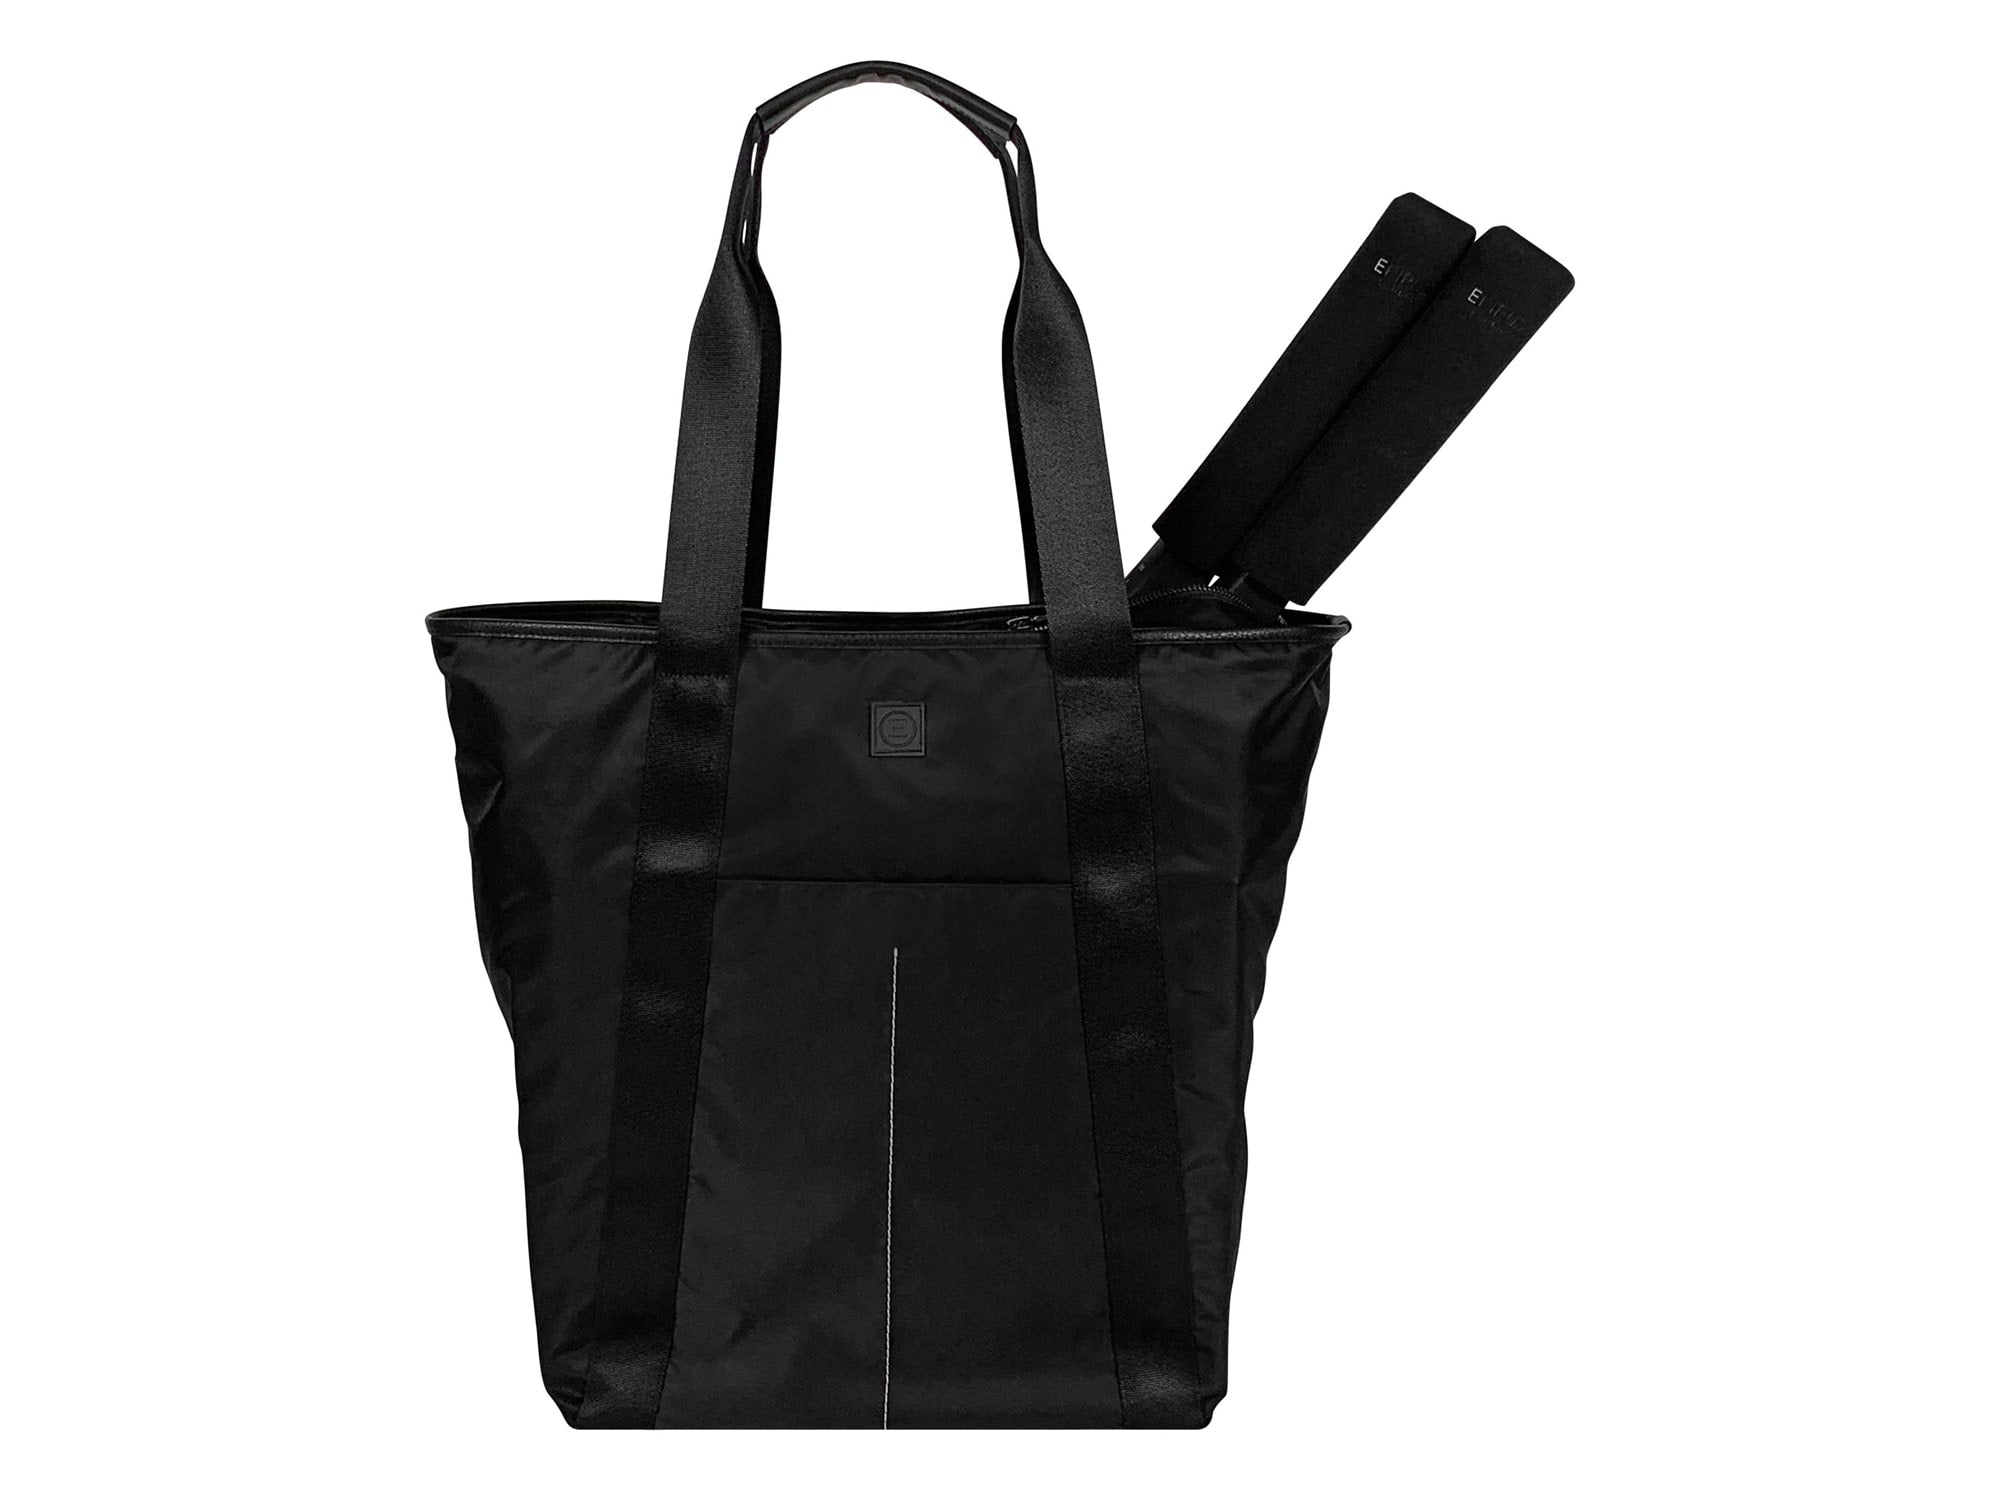 Epirus Transition Tote Tennis Bag with two rackets